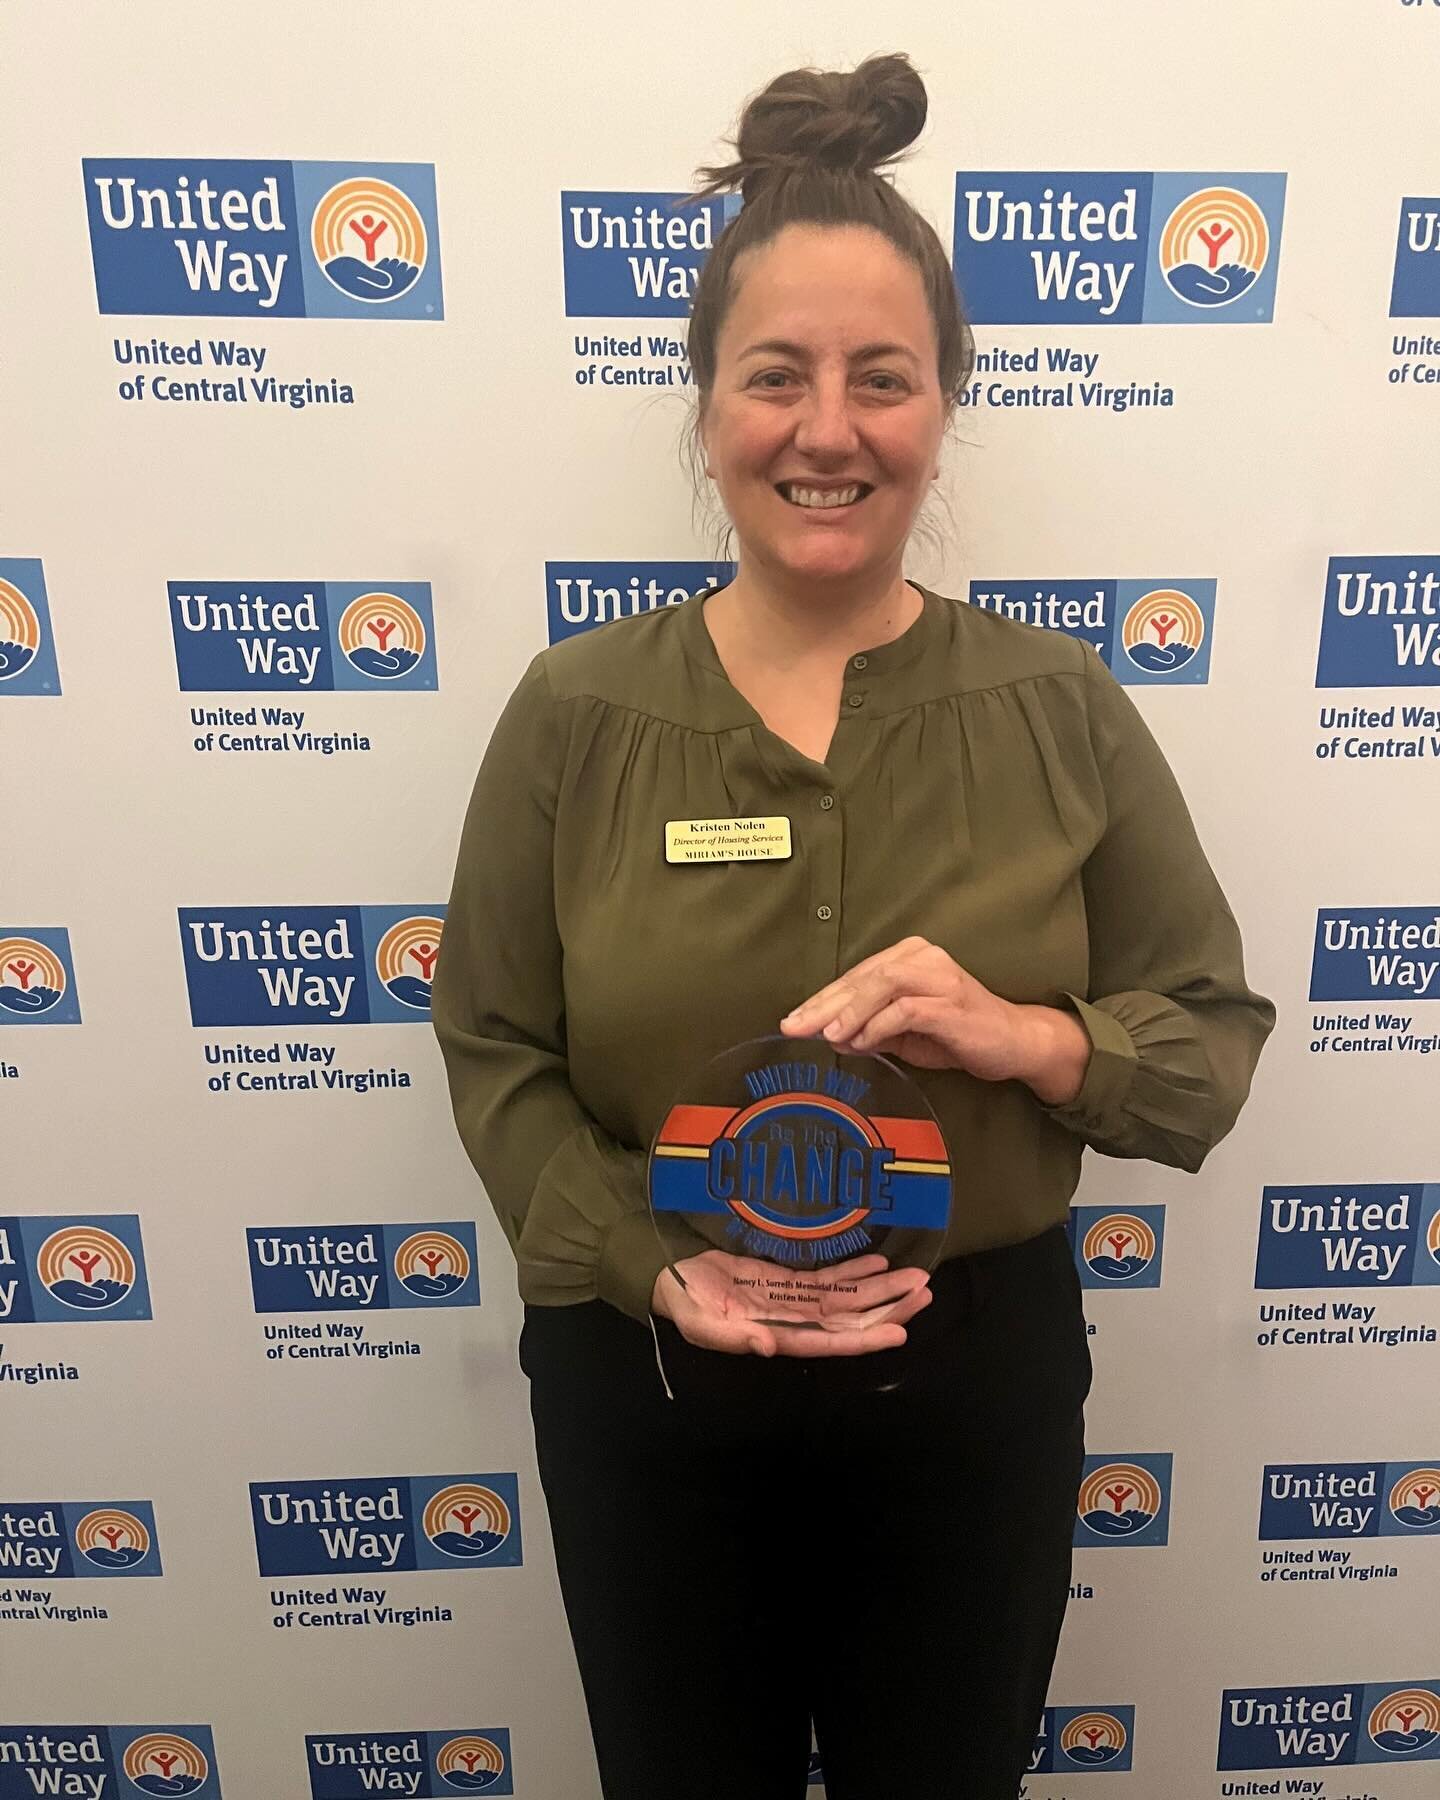 We are thrilled to announce that our very own Kristen Nolen has been awarded The United Way of Central Virginia&rsquo;s Nancy L. Sorrells Memorial Award, presented annually to a staff member of a social service organization whose professionalism and 